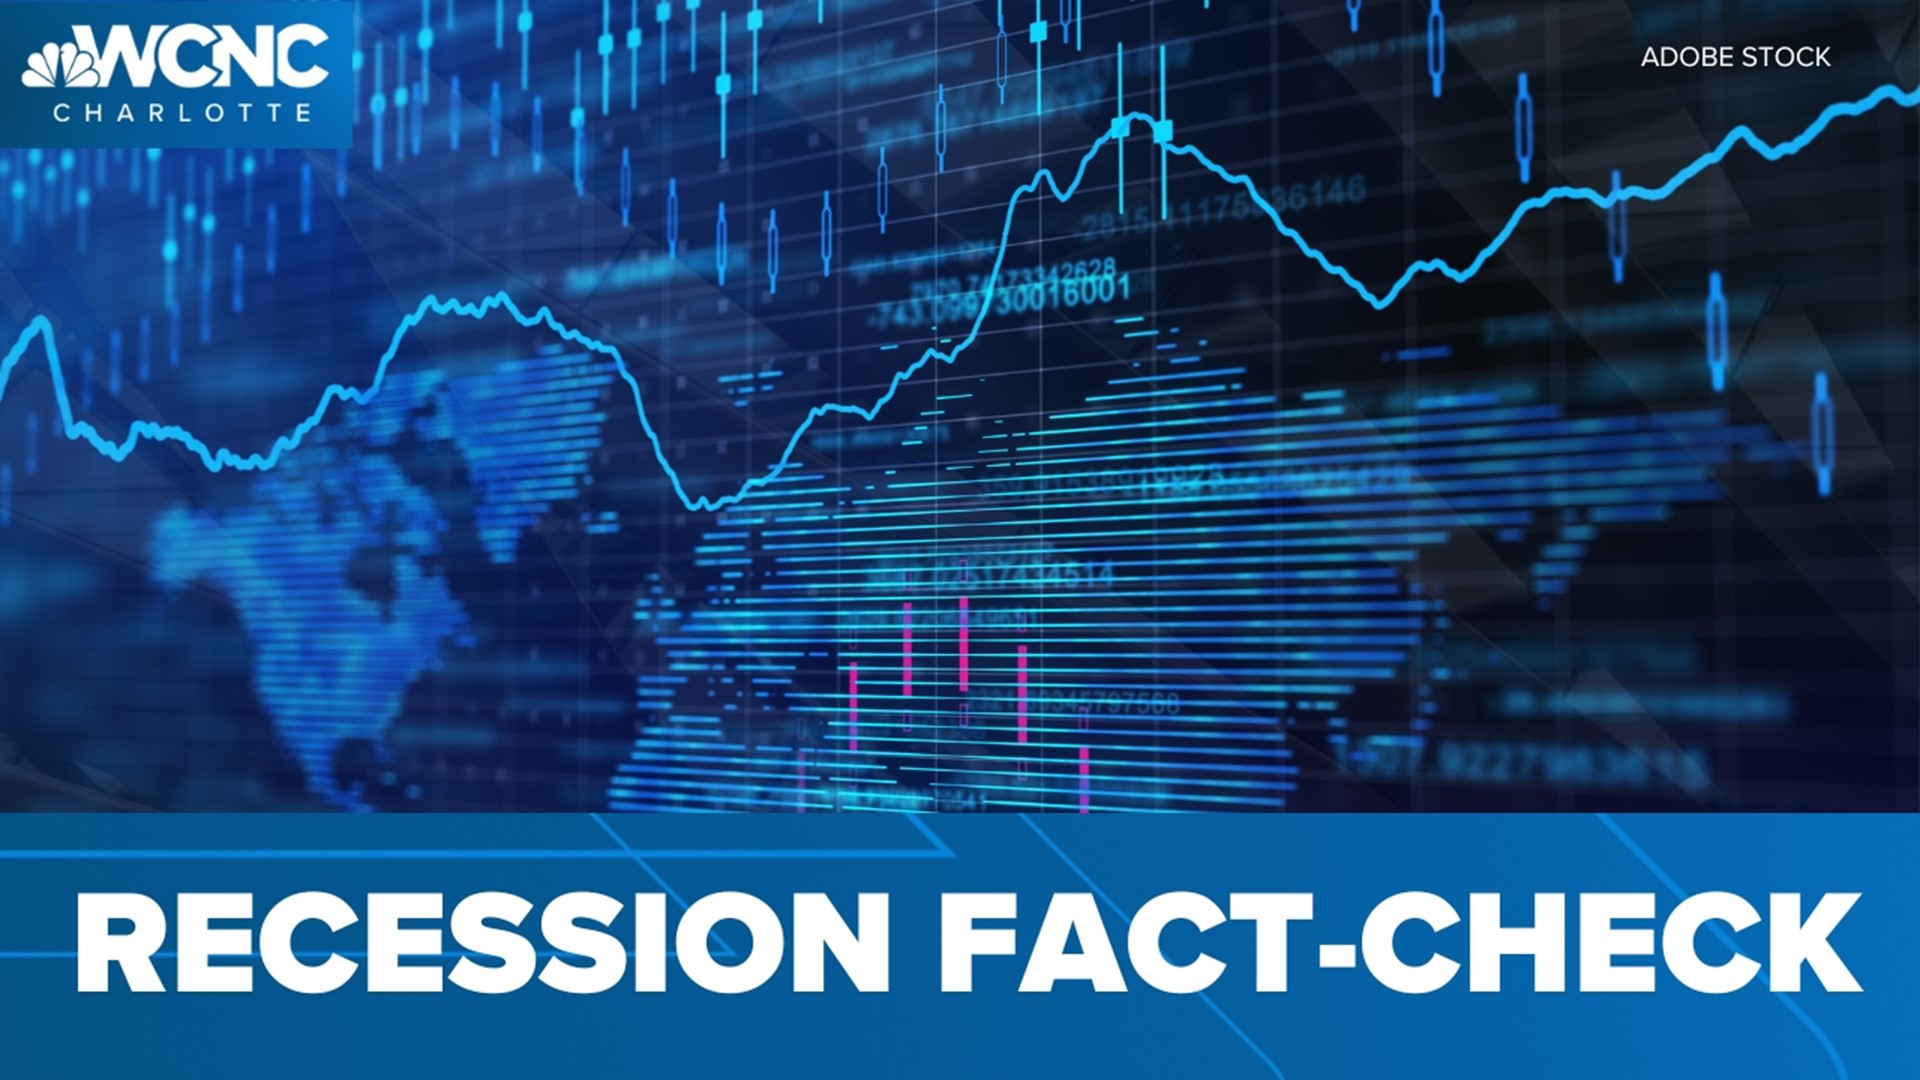 Many people think this means we are officially in a recession. So what does it mean to be in a recession, and is there a definition?